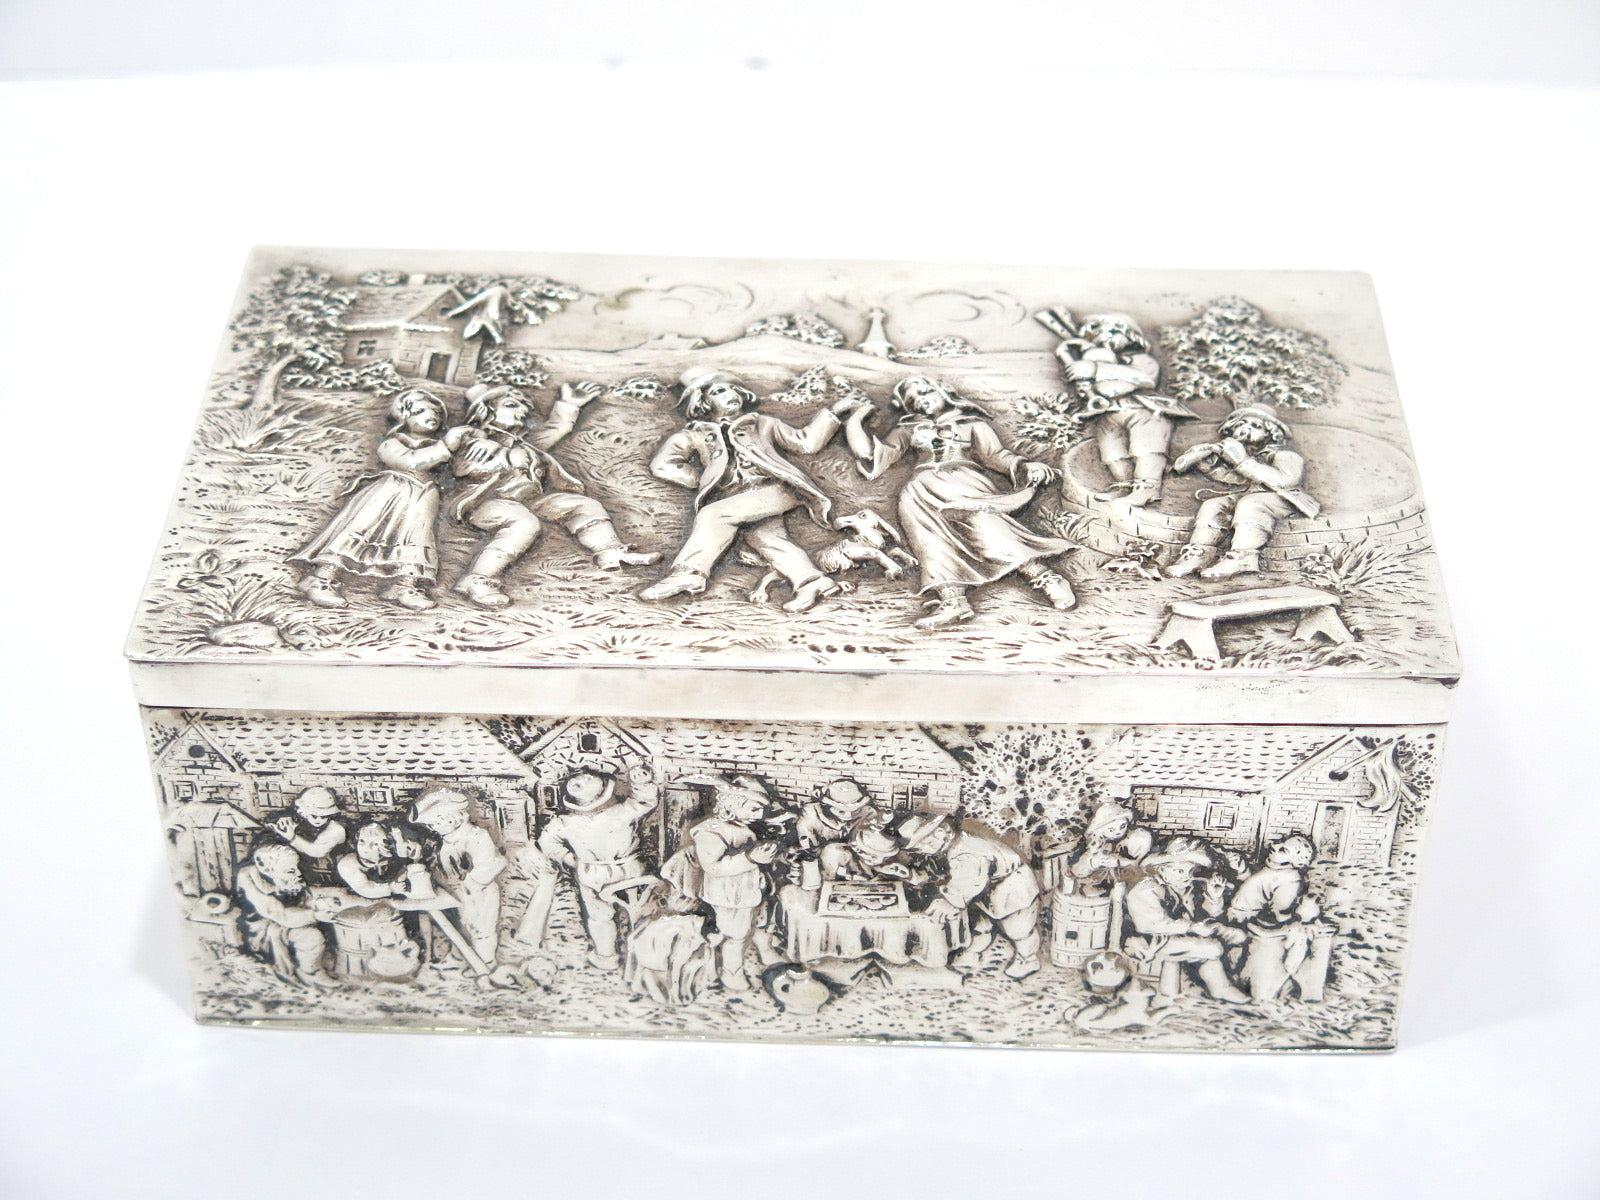 7 in - European Silver Antique German Dancing Scene Box In Good Condition For Sale In Brooklyn, NY